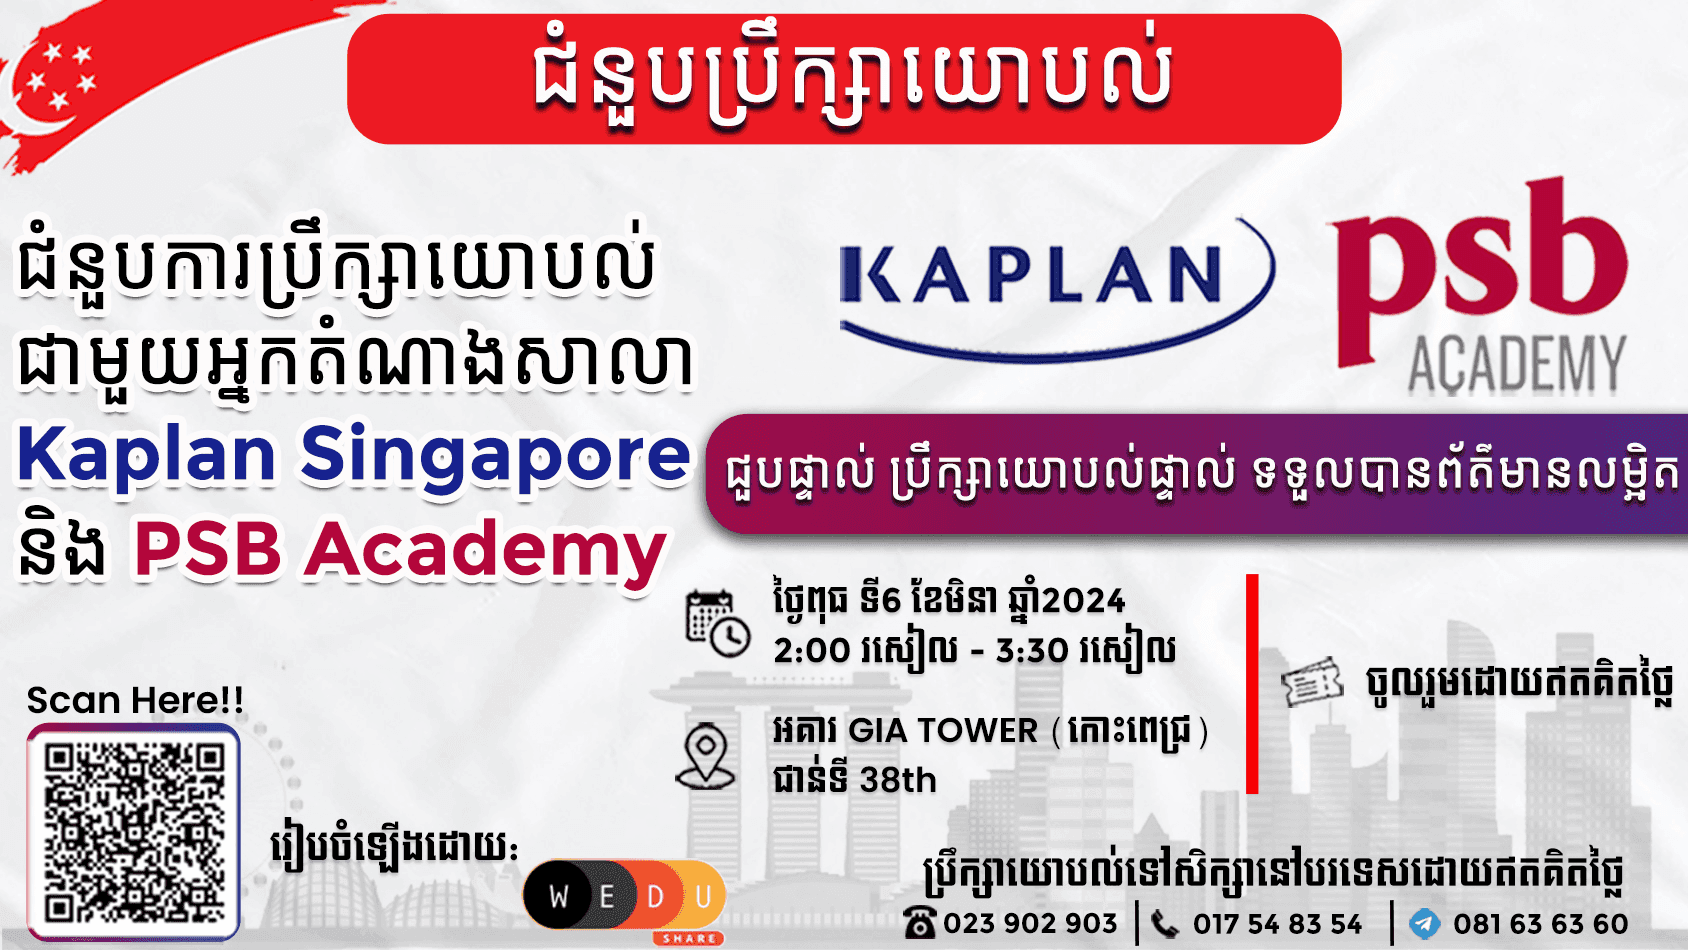 [Consultation Session] Meet with Kaplan Singapore and PSB Academy School Representatives